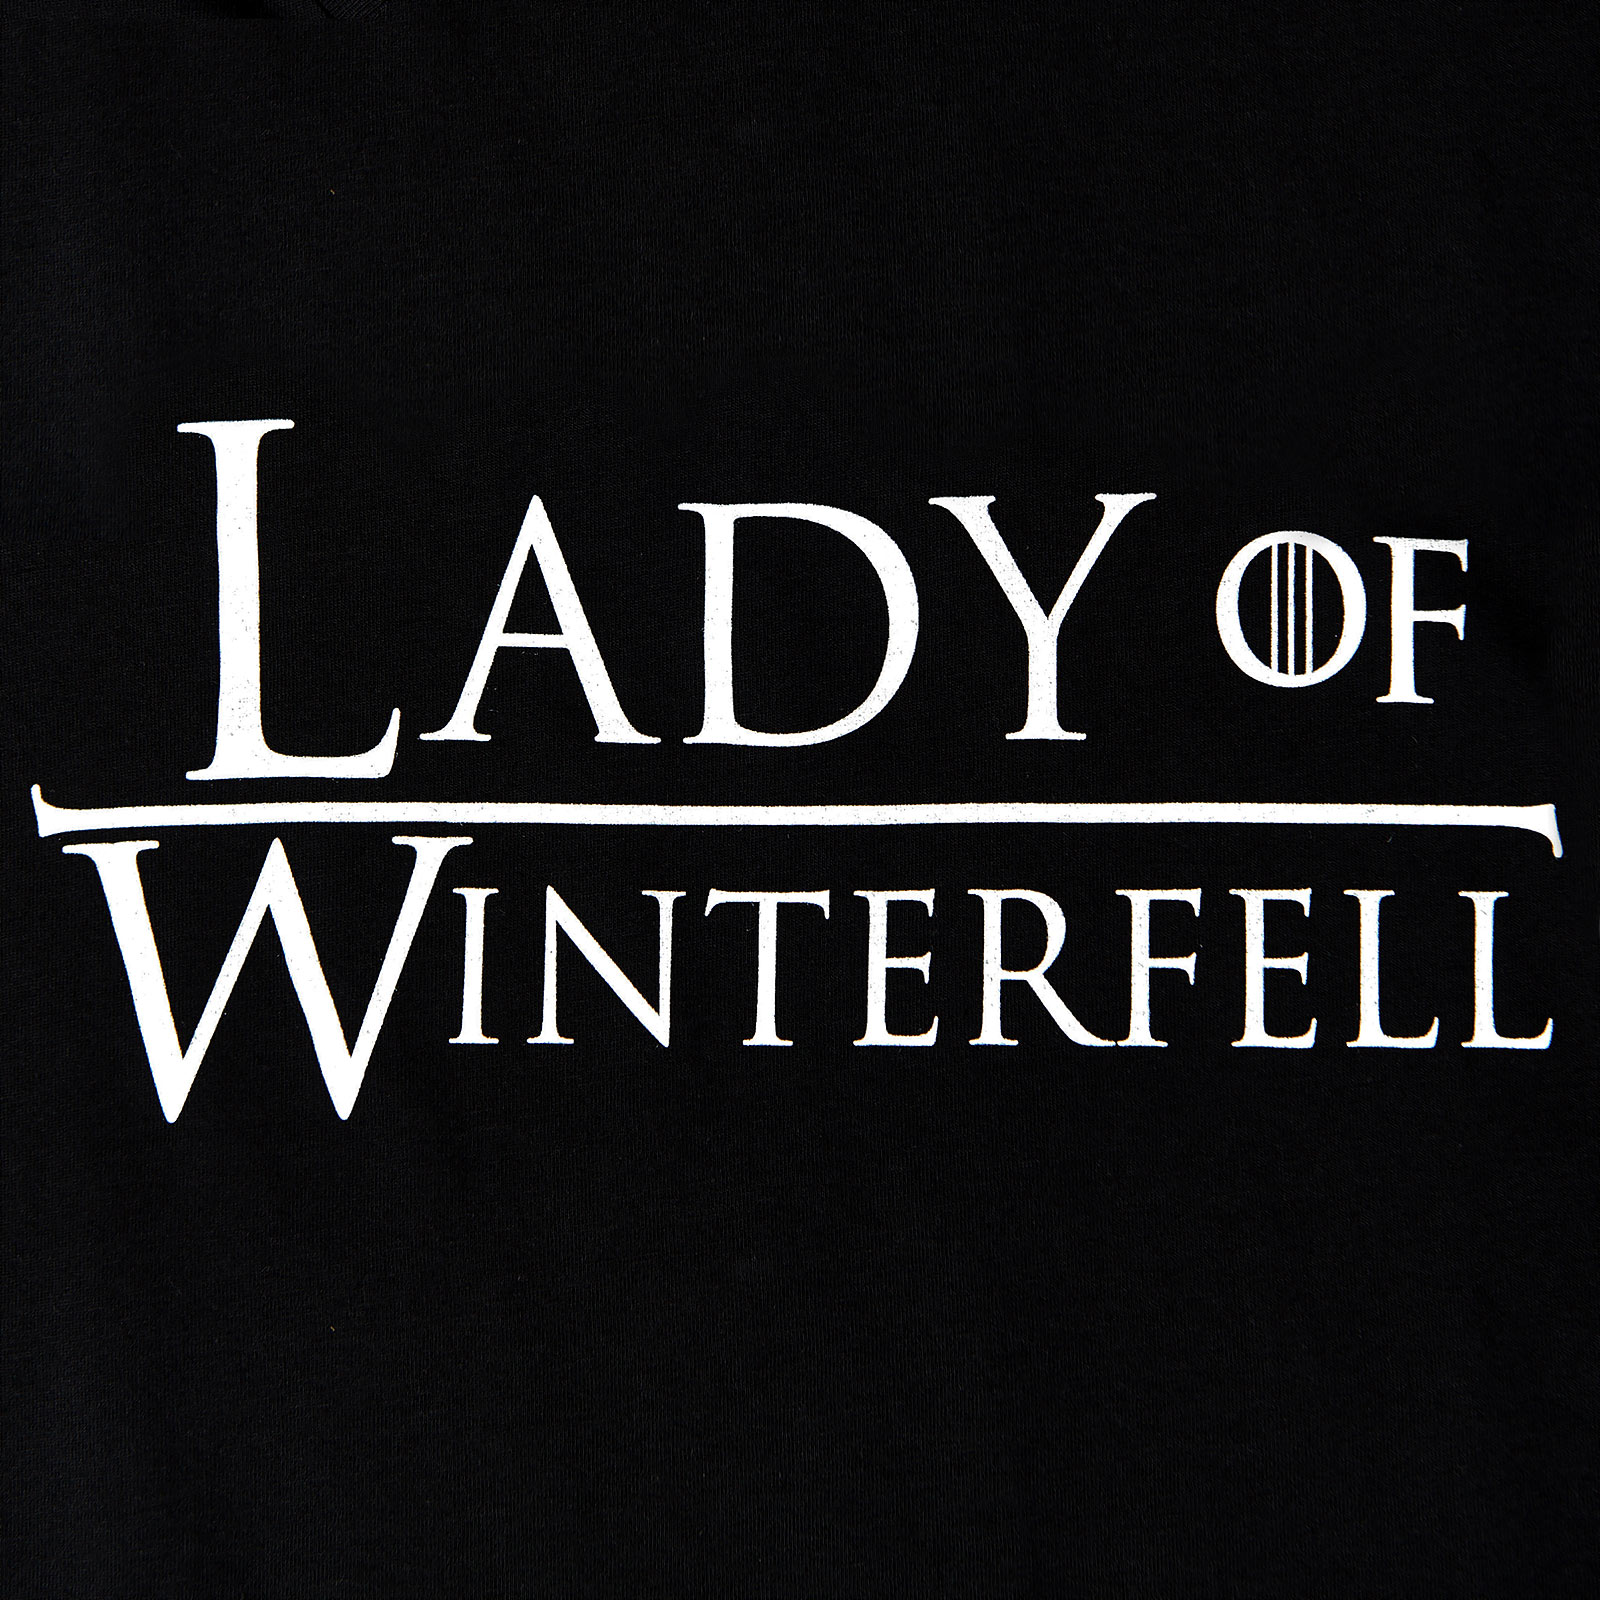 Lady of Winterfell Women's T-Shirt for Game of Thrones Fans